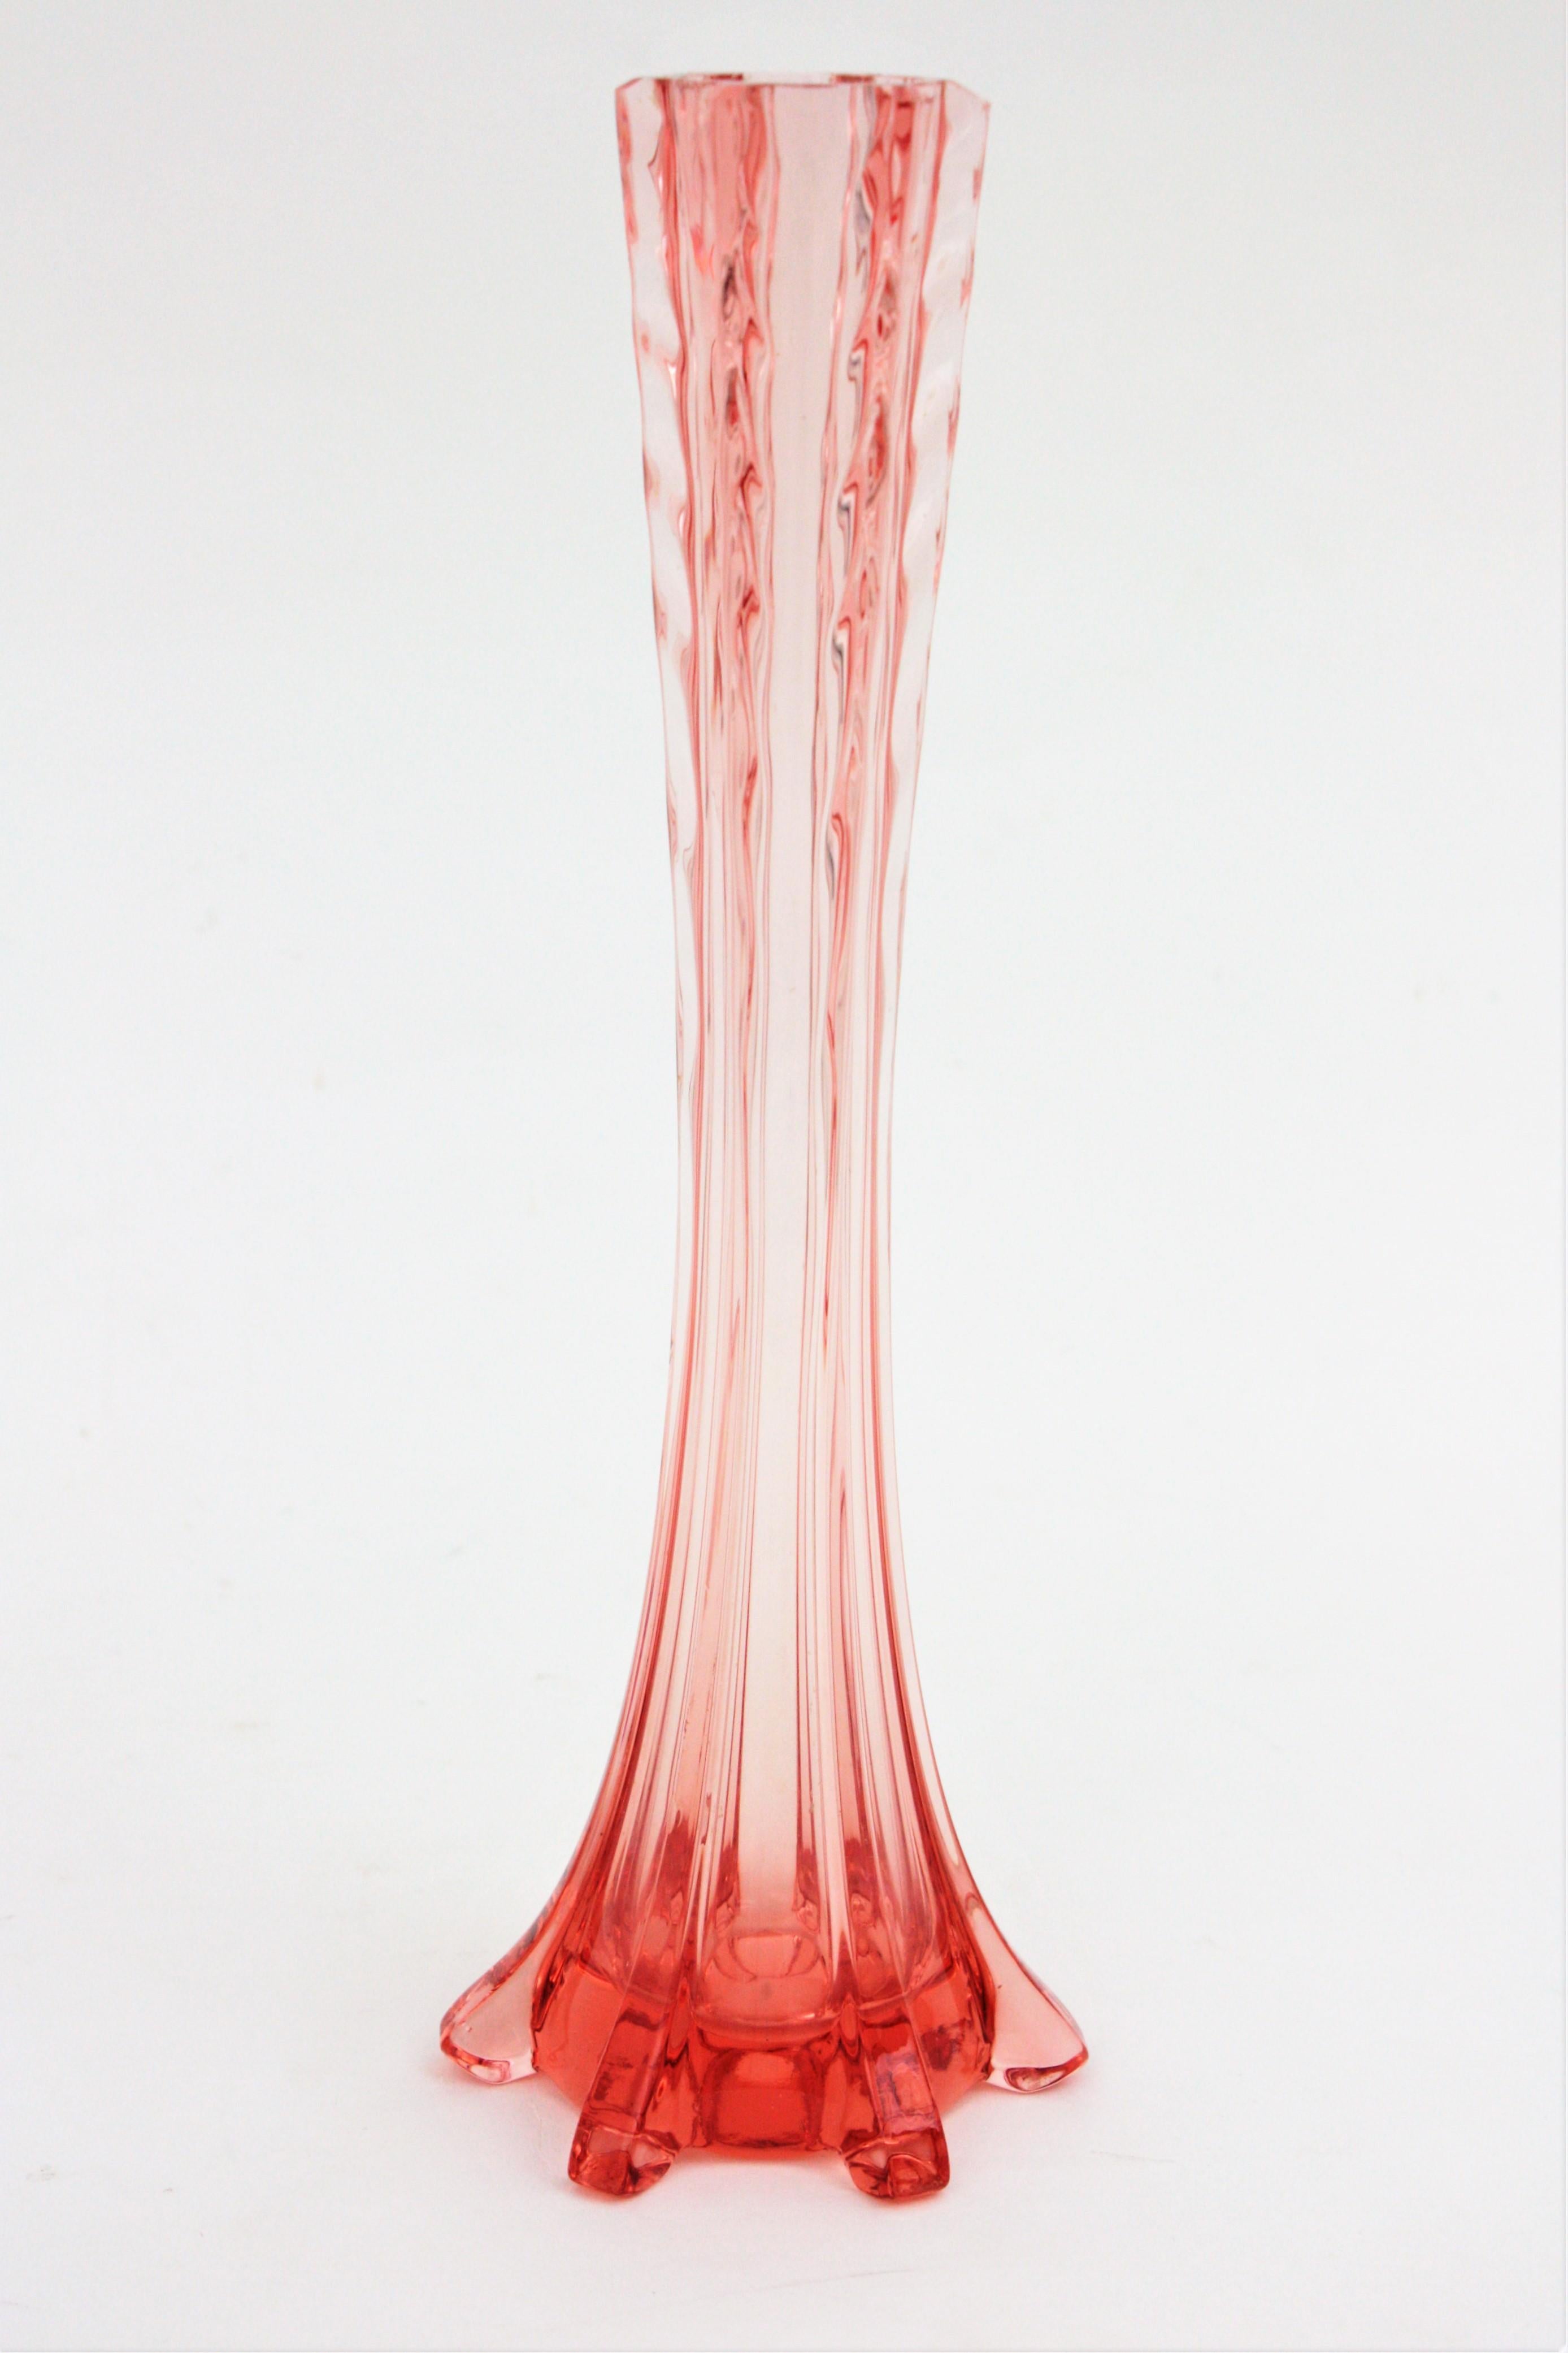 French Art Deco Blown Glass Pink Amberina Single Flower Vase In Excellent Condition For Sale In Barcelona, ES